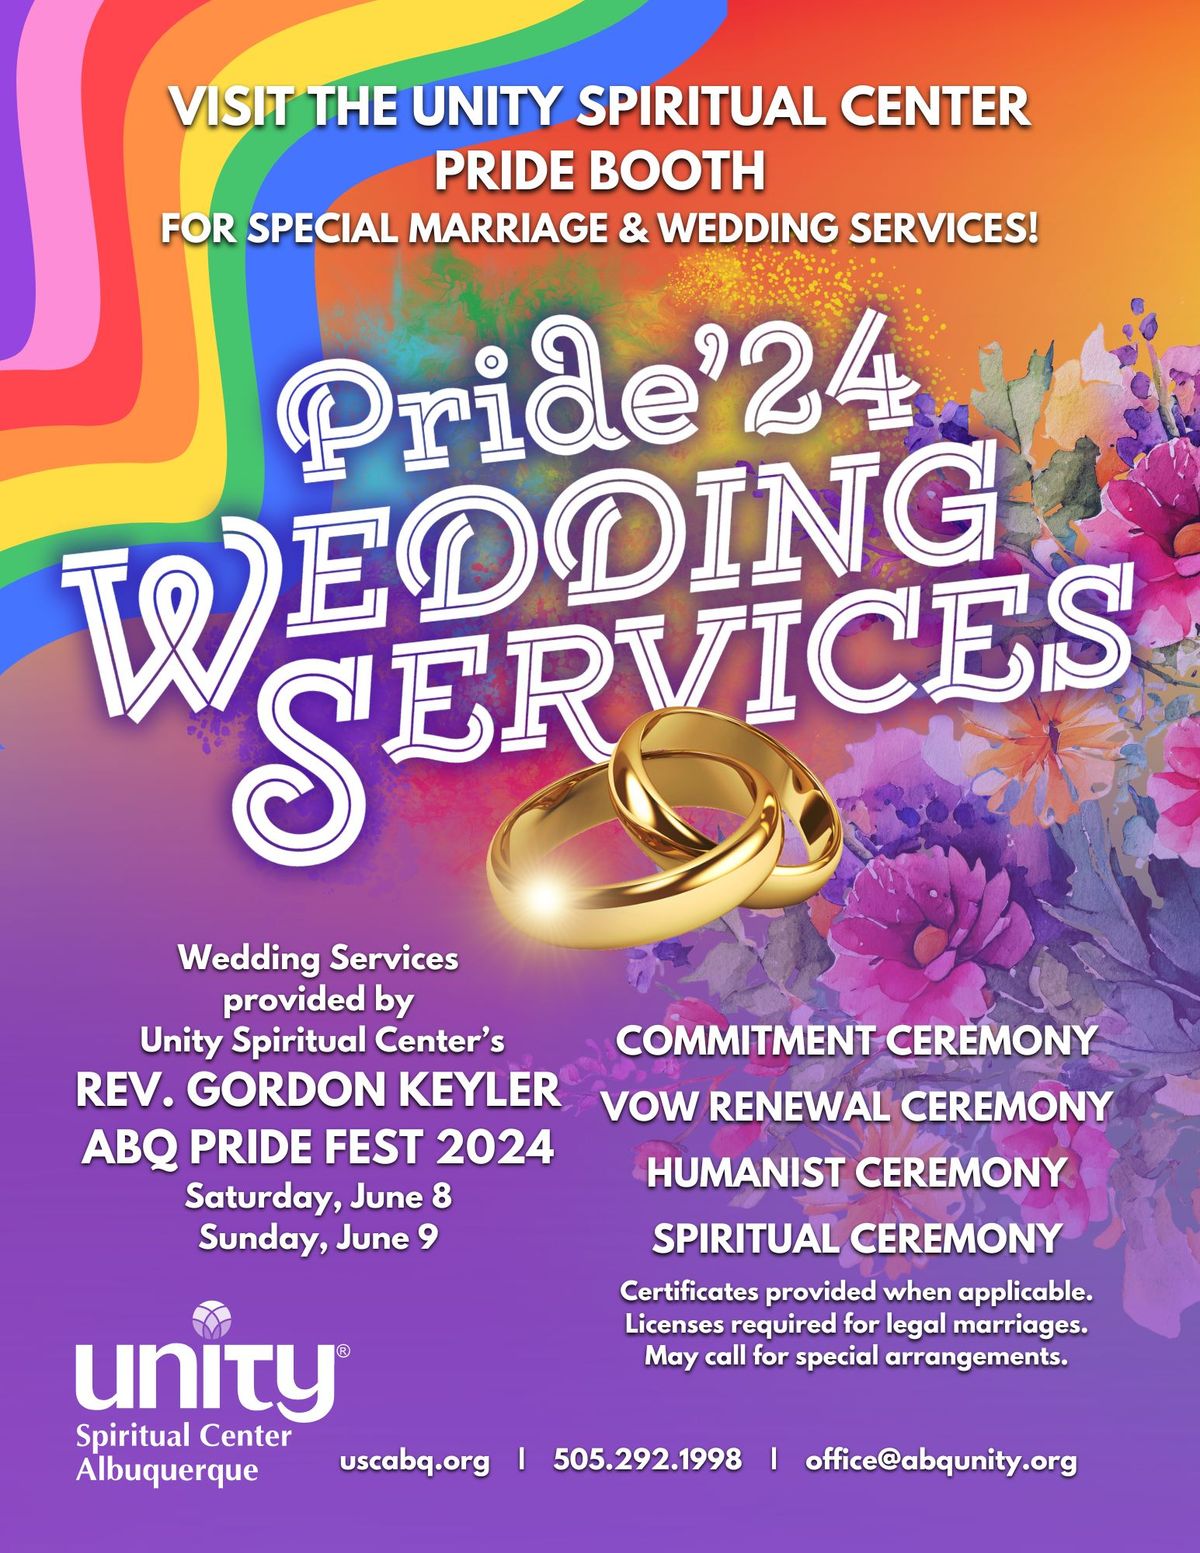 Unity Spiritual Center will be offering Wedding Services at Pride this year!